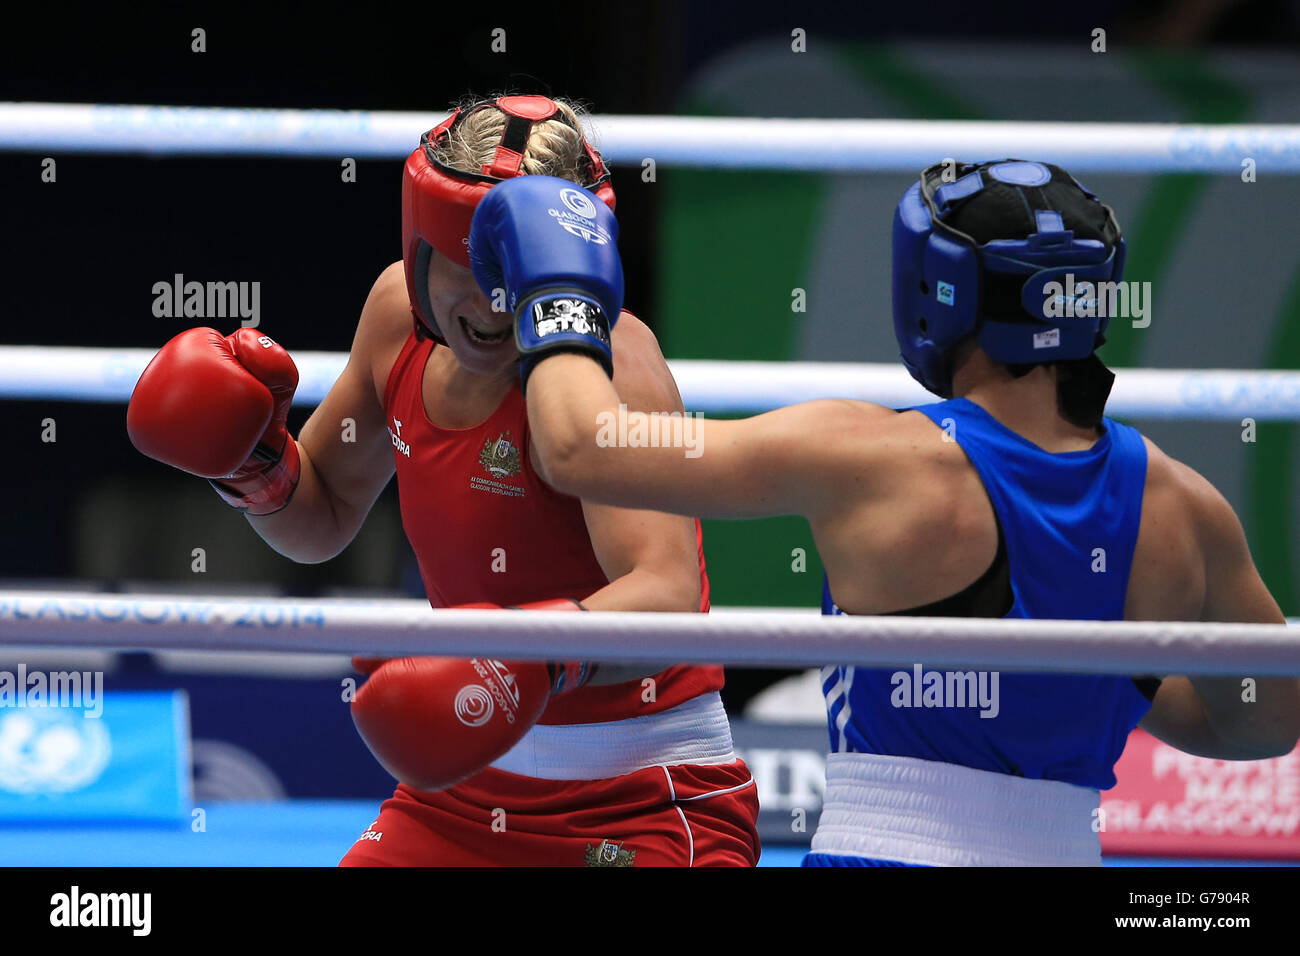 Wales' Lauren Price in action against Australia's Kaye Scott (left) in the Women's Middle Quarter-final at the SECC, during the 2014 Commonwealth Games in Glasgow. PRESS ASSOCIATION Photo. Picture date: Wednesday July 30, 2014. See PA story COMMONWEALTH Boxing. Photo credit should read: Peter Byrne/PA Wire. Stock Photo